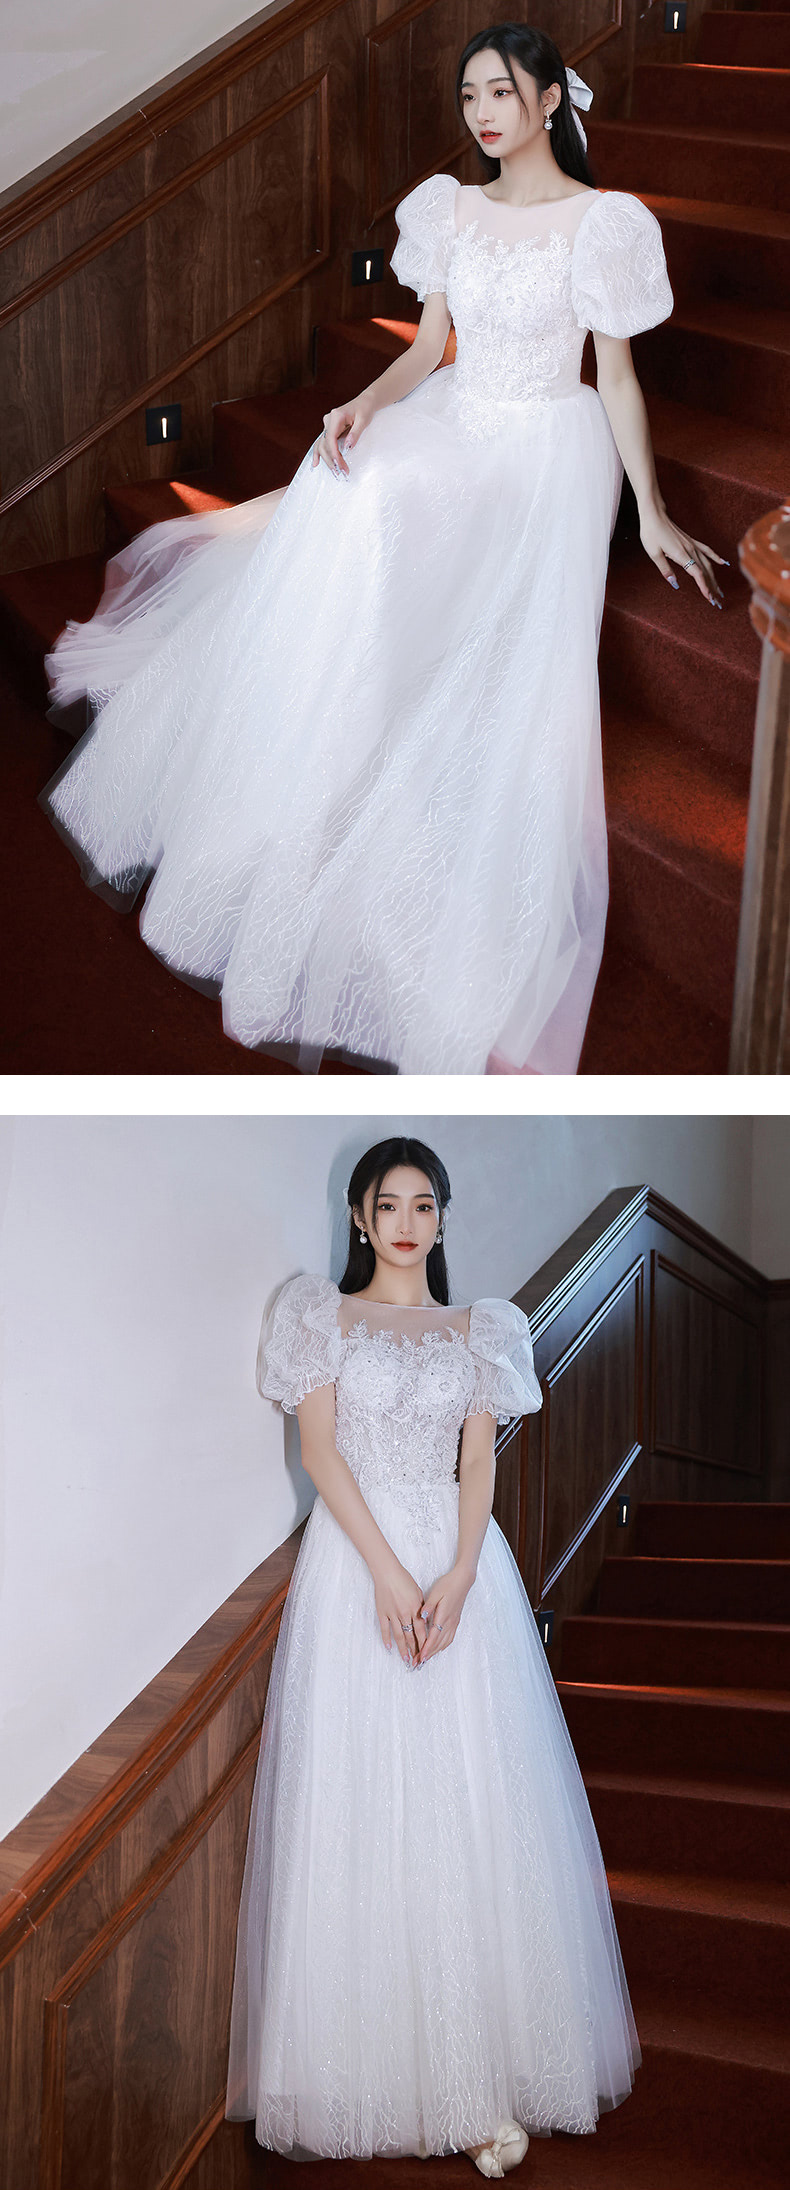 Exquisite-White-Tulle-Puffy-Prom-Evening-Formal-Long-Dress12.jpg